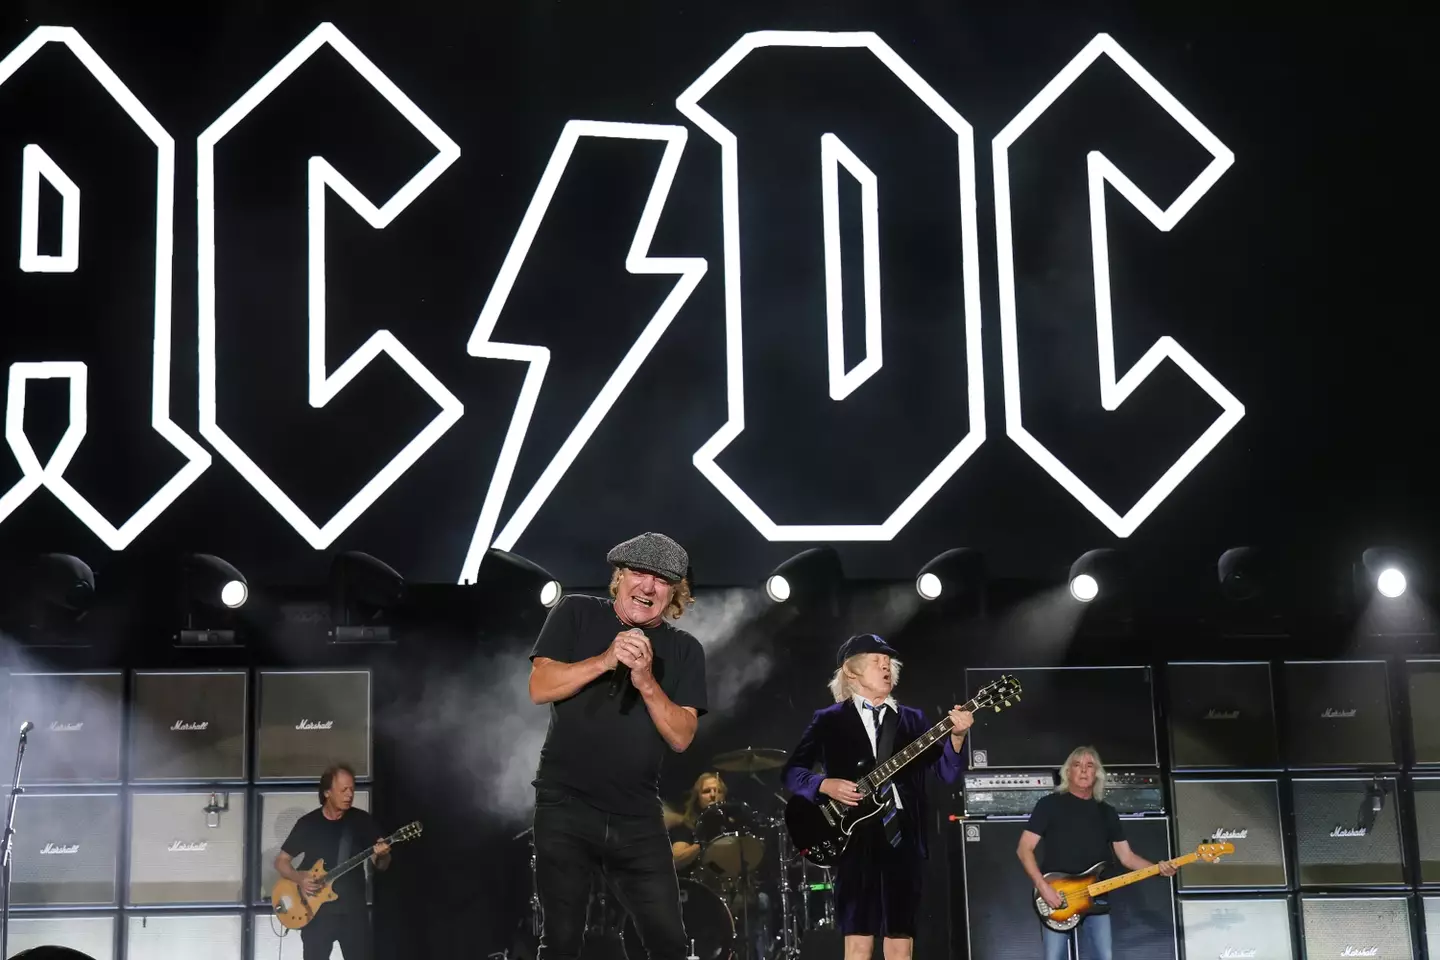 The current AC/DC band members paid tribute to Burgess on social media.